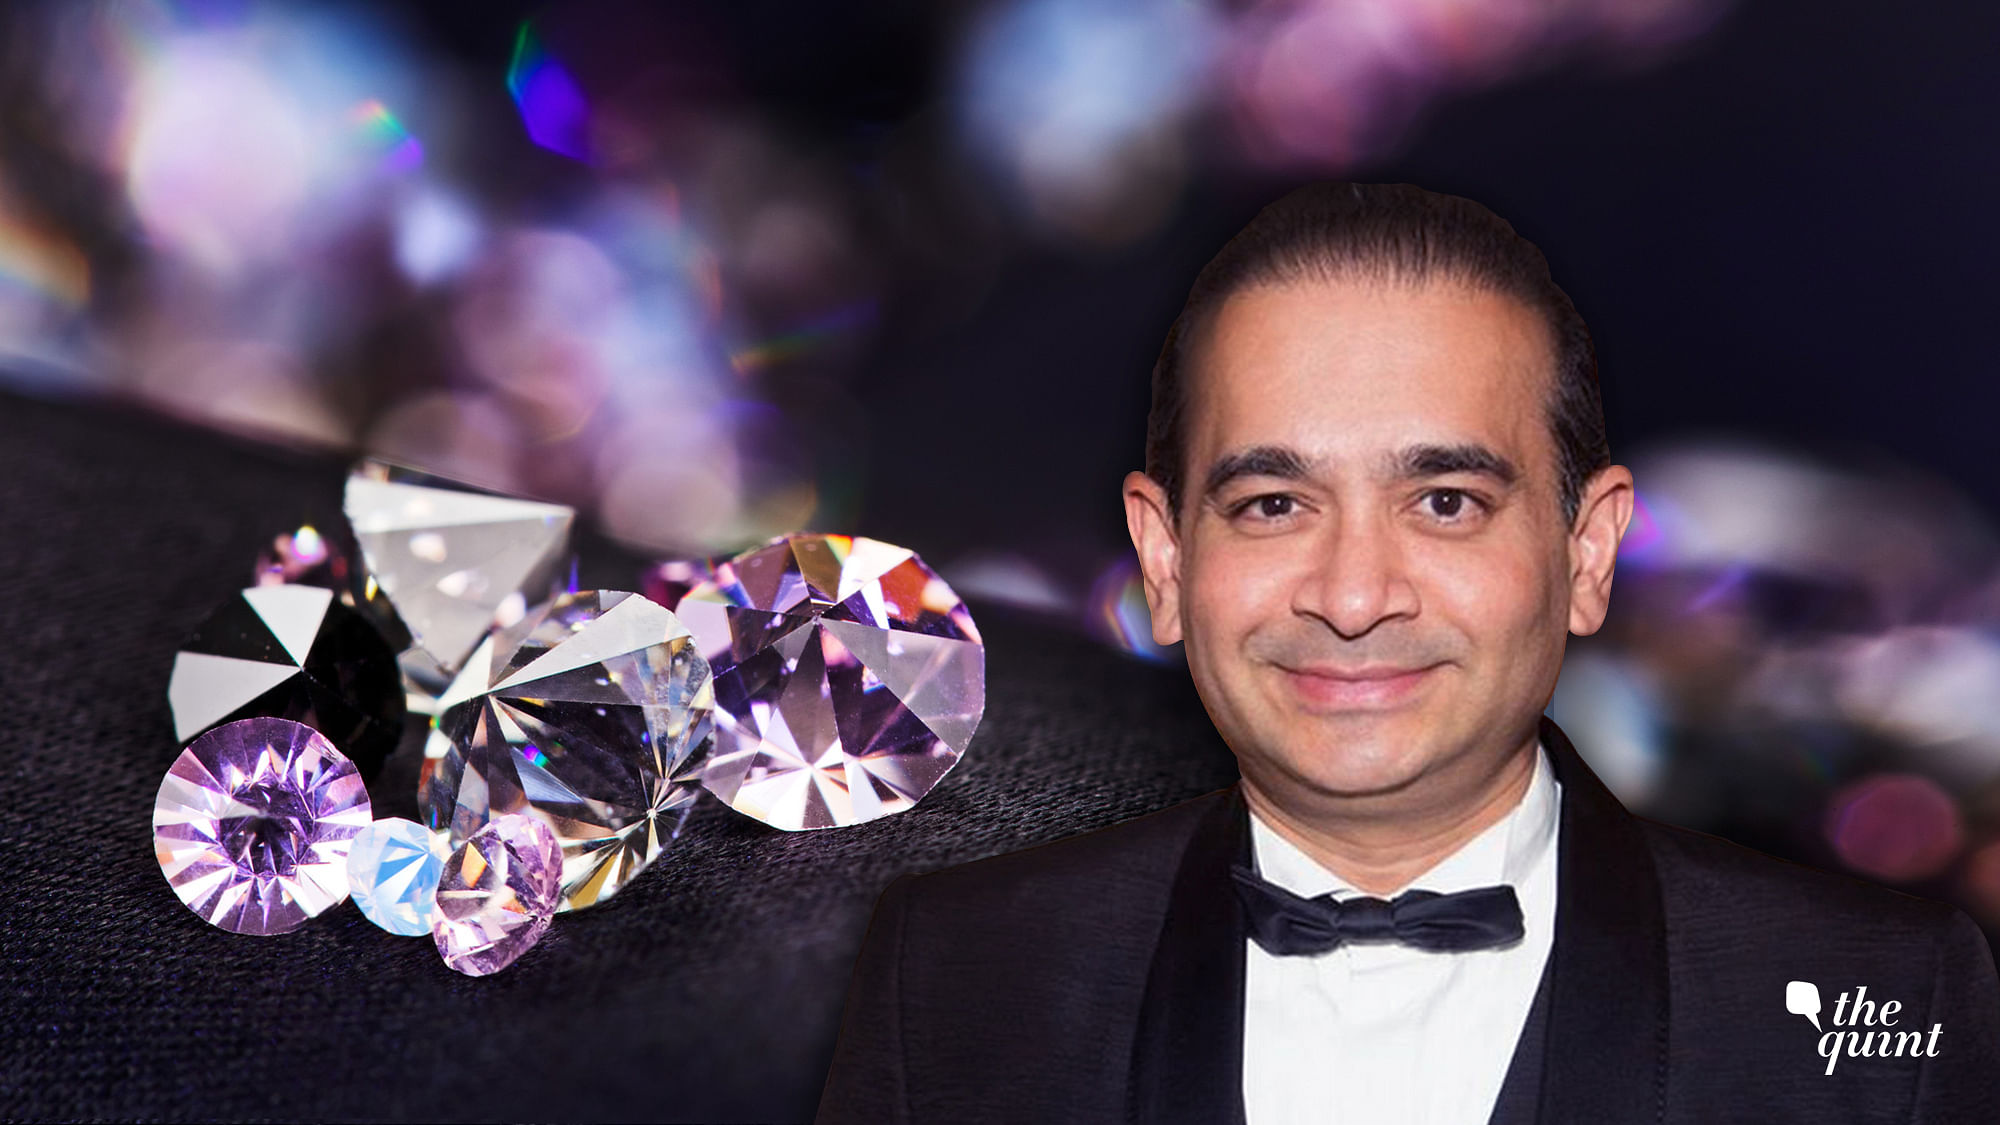 Nirav Modi has been behind bars at Wandsworth Prison in southwest London since his arrest last year, following India’s extradition request.